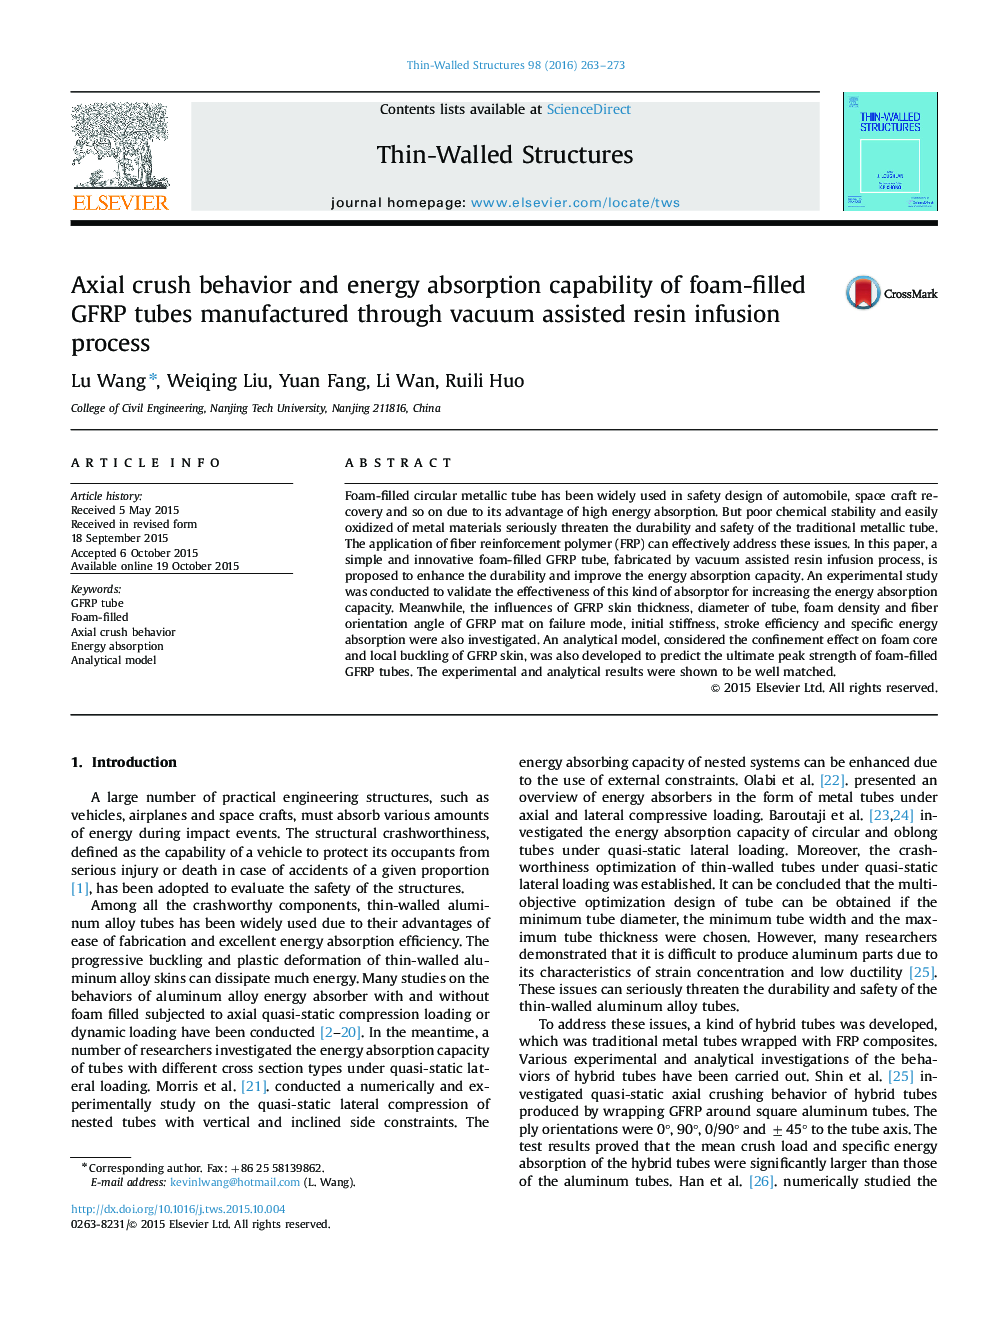 Axial crush behavior and energy absorption capability of foam-filled GFRP tubes manufactured through vacuum assisted resin infusion process